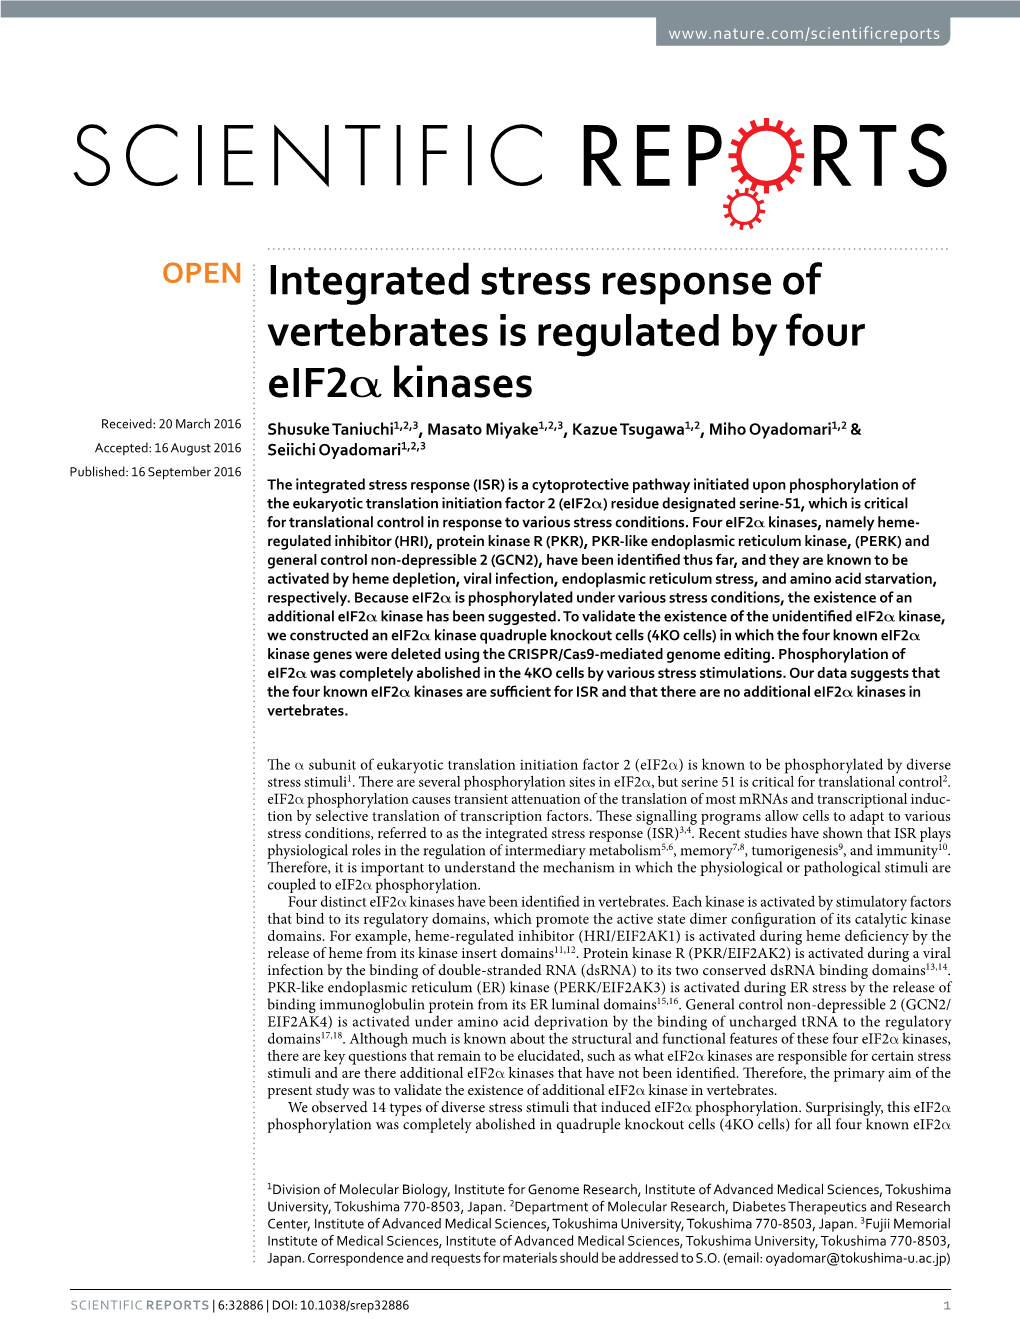 Integrated Stress Response of Vertebrates Is Regulated by Four